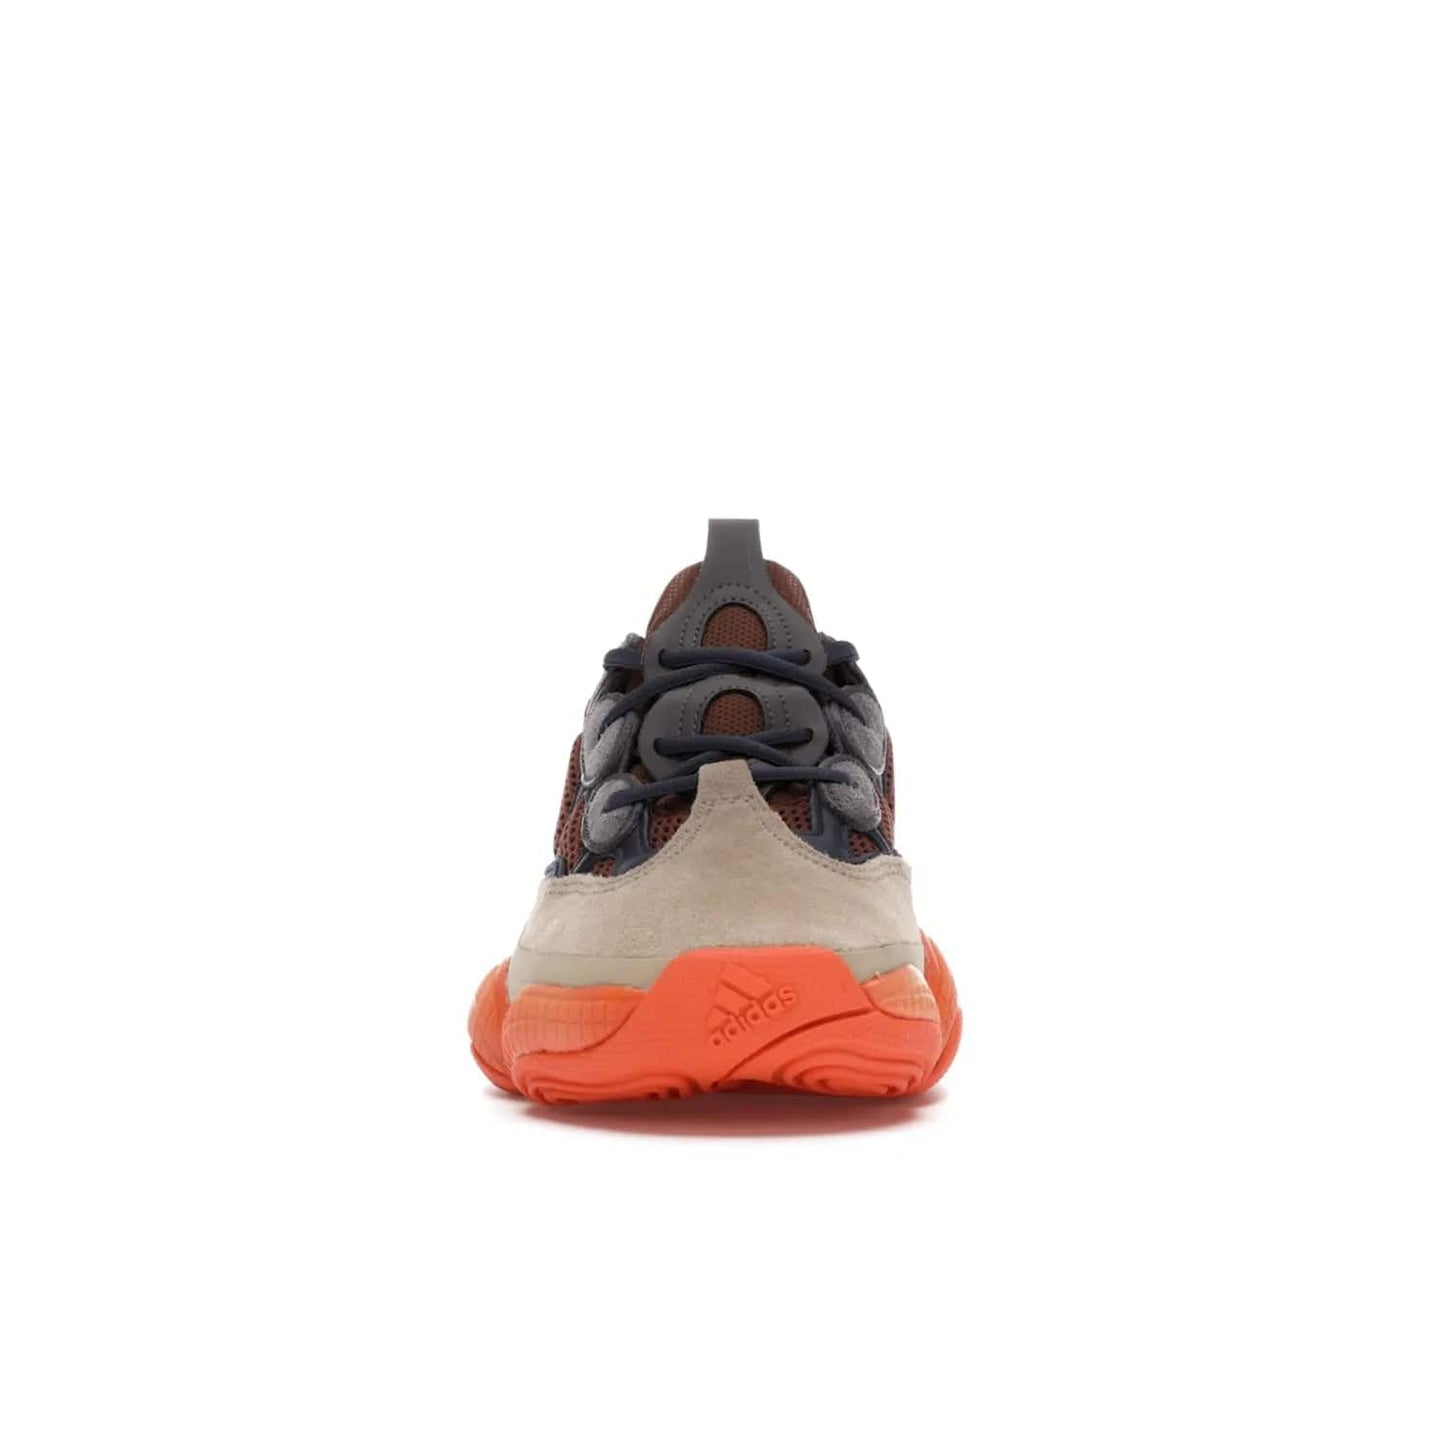 adidas Yeezy 500 Enflame - Image 10 - Only at www.BallersClubKickz.com - Step into style with the adidas Yeezy 500 Enflame. Mix of mesh, leather, and suede layered together to create tonal-brown, dark blue, & orange. Orange AdiPRENE sole provides superior cushioning & comfort. Get yours and experience maximum style.